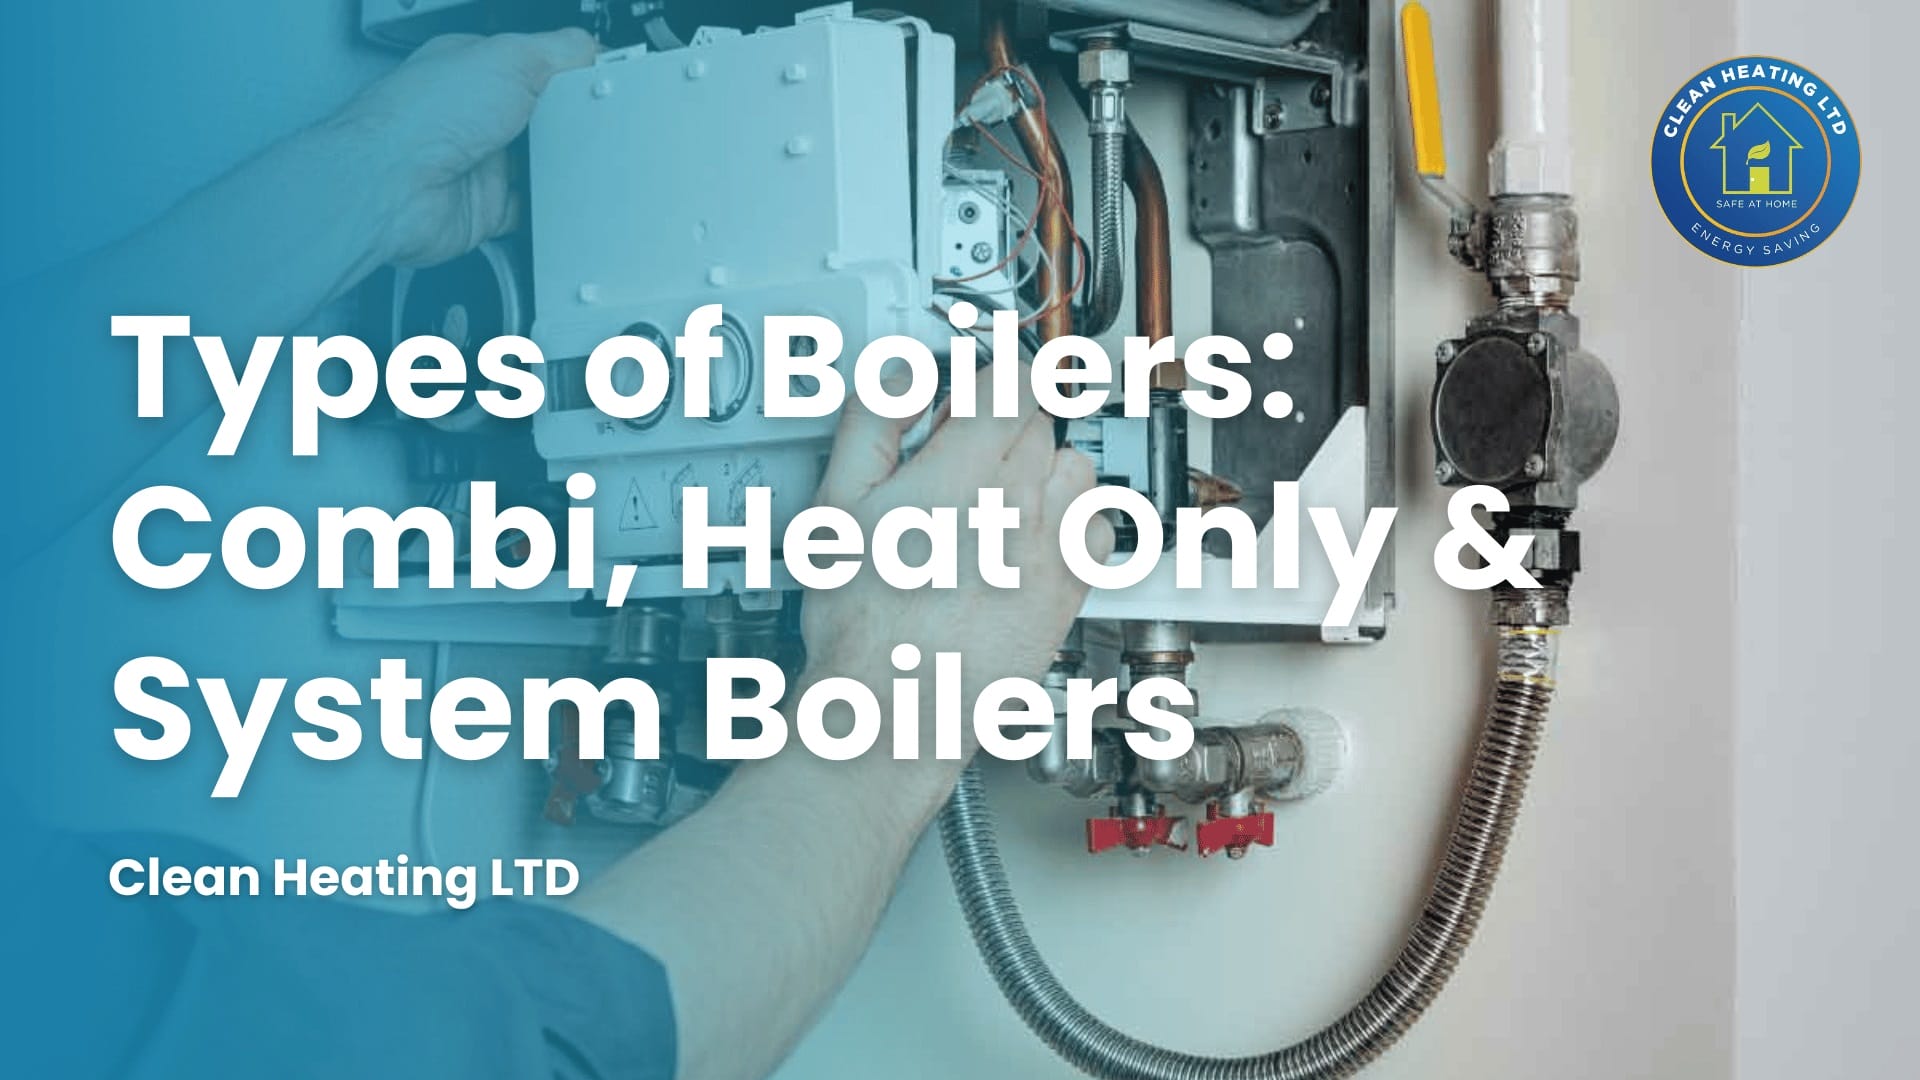 Types of Boilers Combi Heat Only System Boilers 1